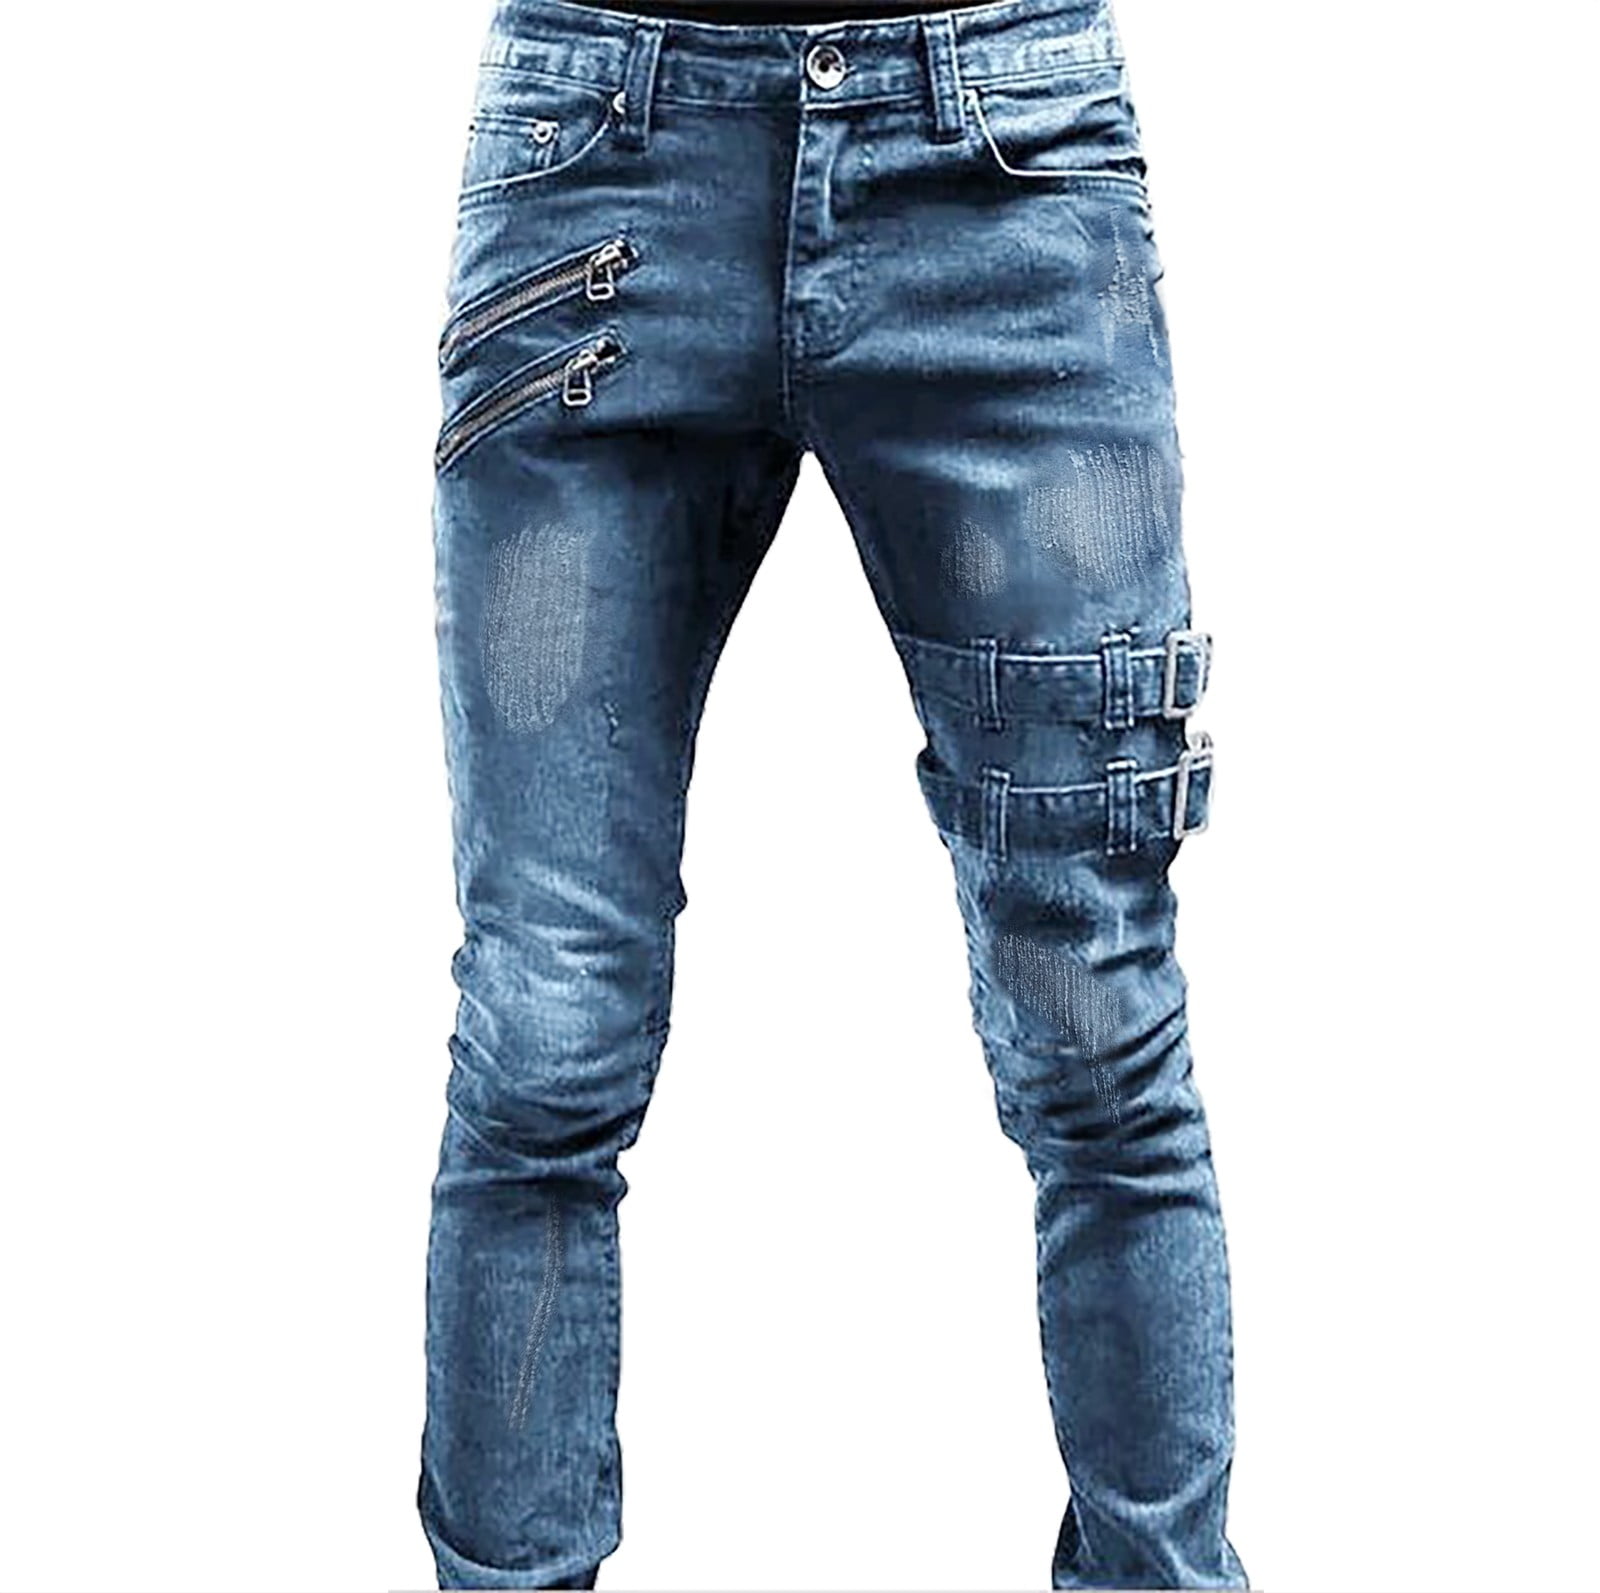 Yubnlvae jeans for men Men's Trousers Slim Casual Fit Ripped Straight ...